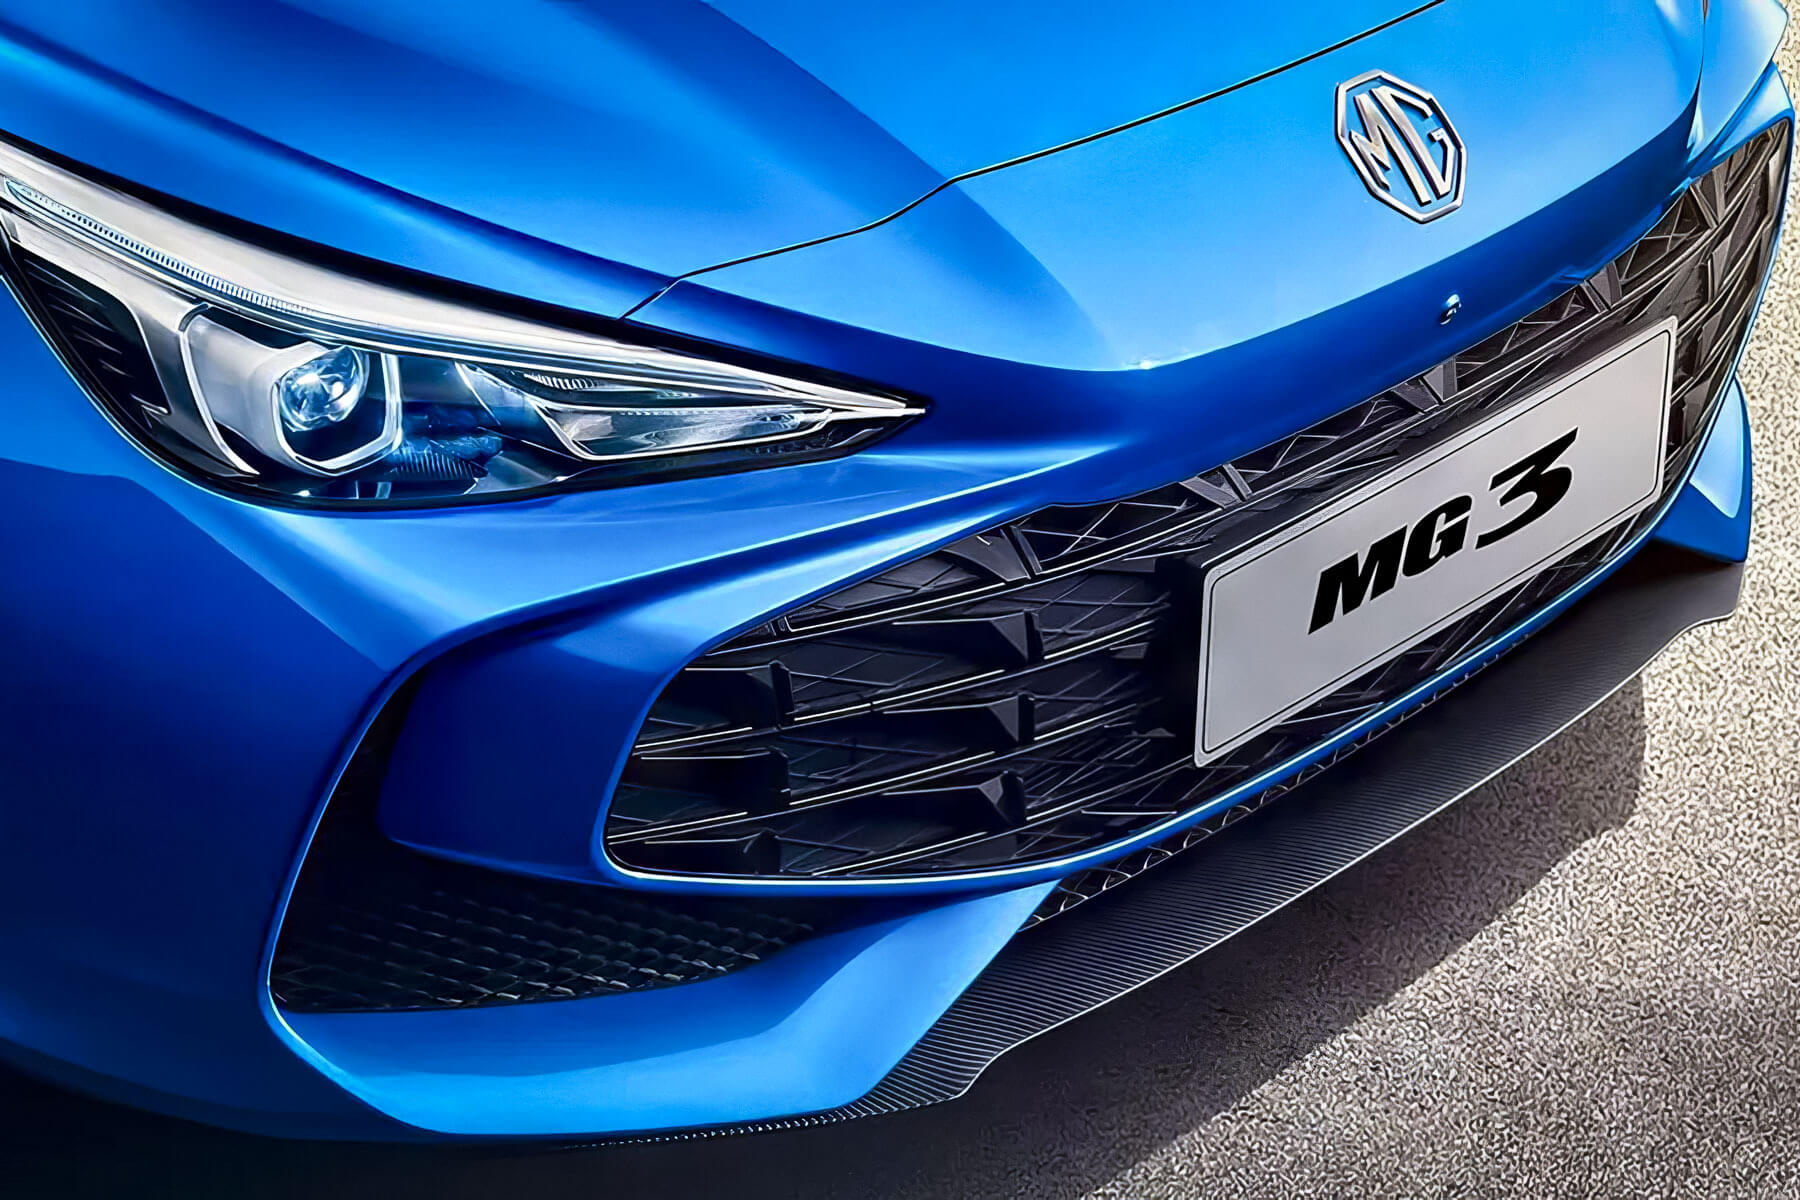 The British-Chinese MG3 hatchback will change its generation in a month